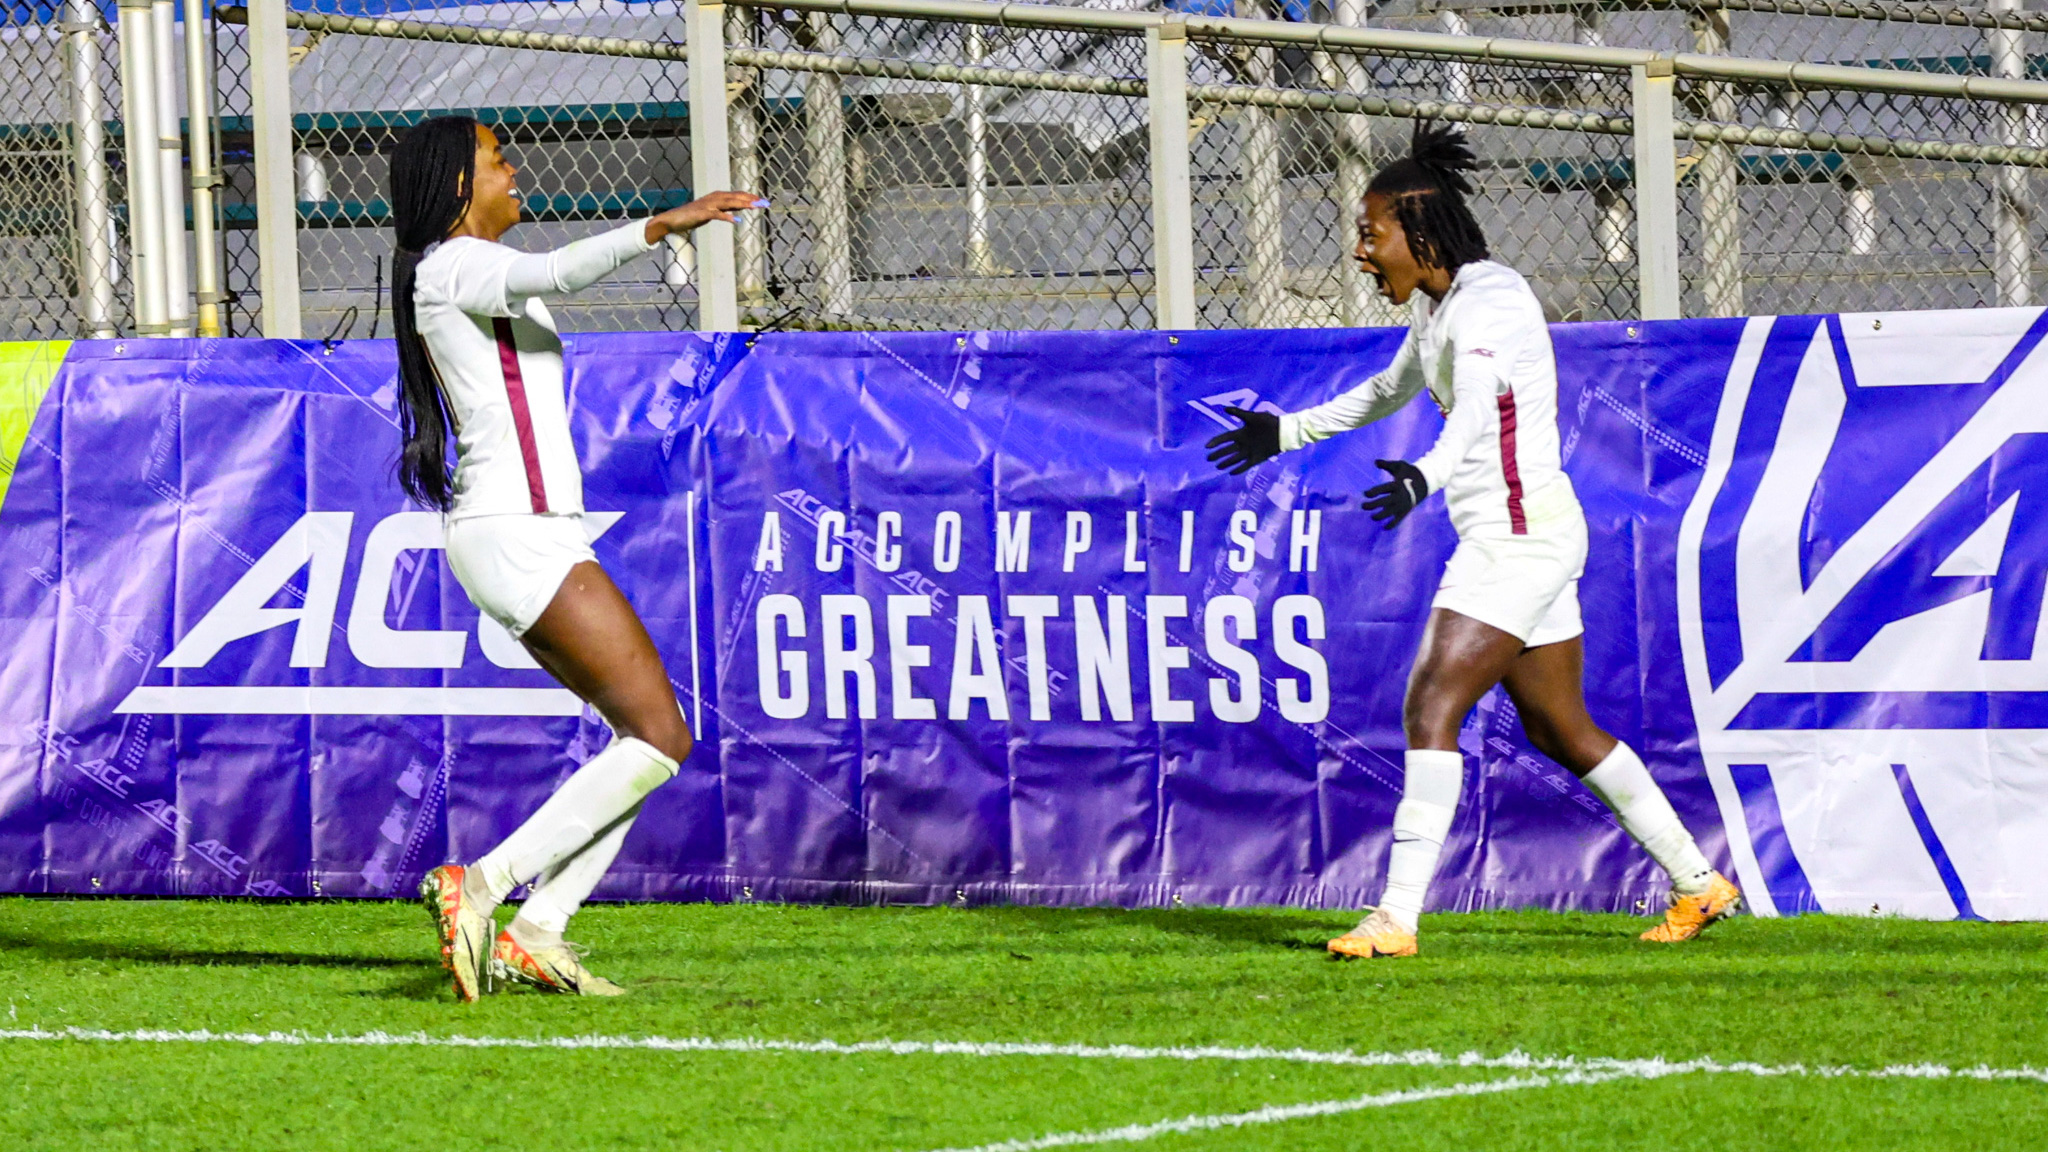 NTX Soccer 2023 Tournament of Champions - General News - News